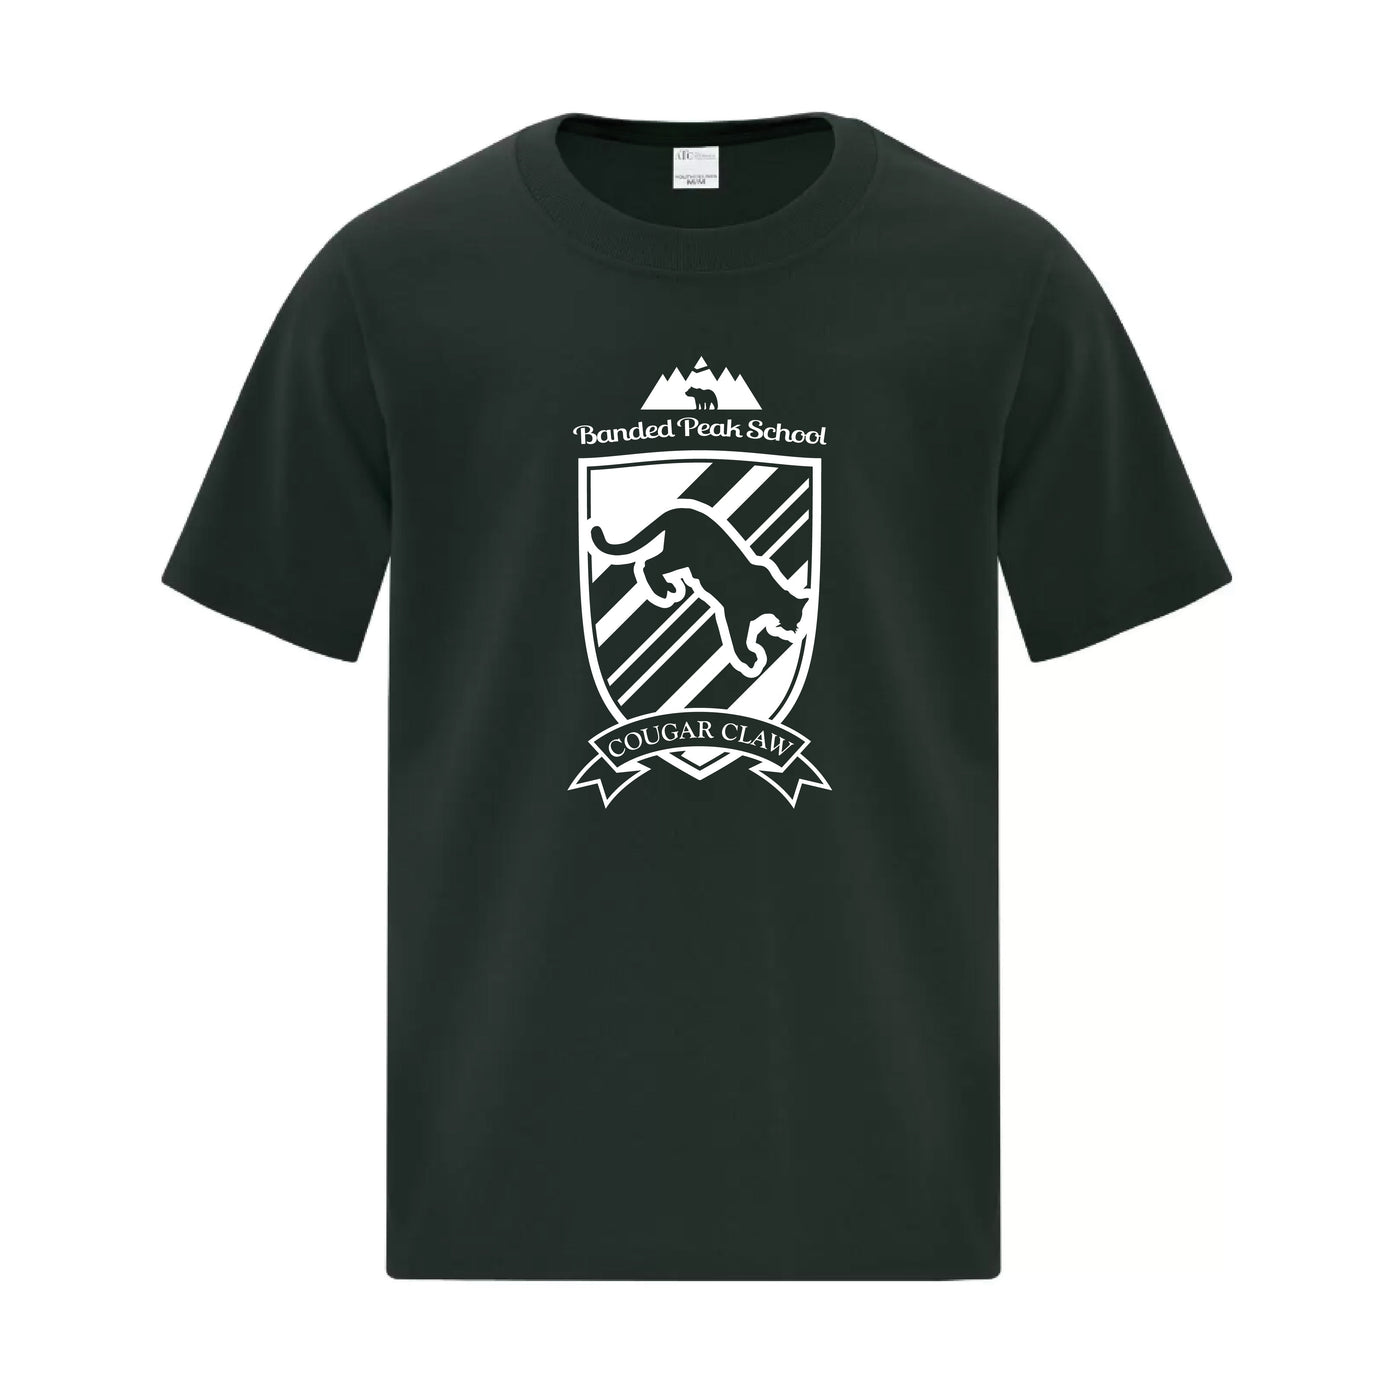 Banded Peak School - Cougar Claw House Tee - Technical T-Shirt